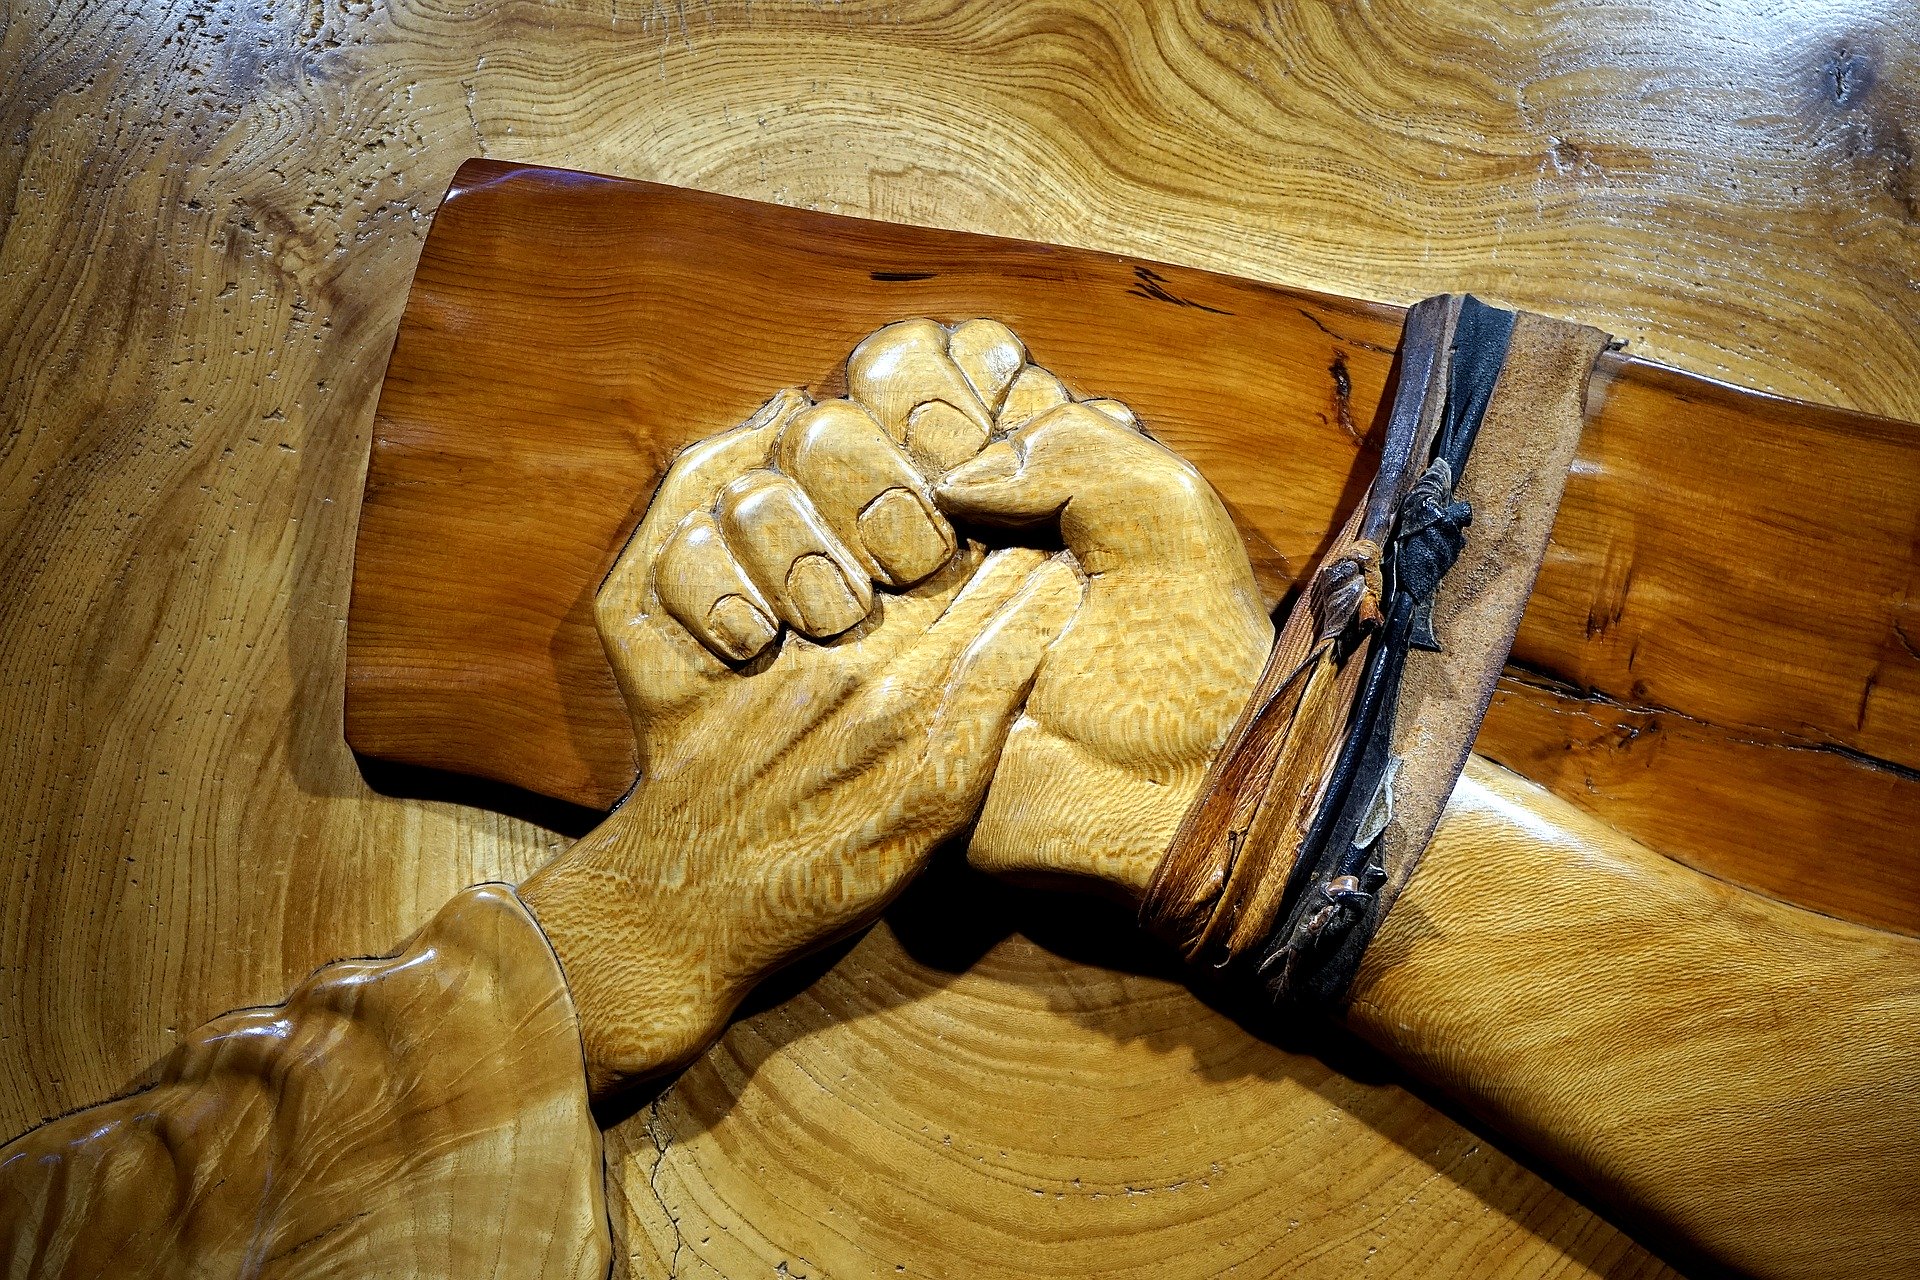 Wooden sculpture of a person holding Jesus' hand on the cross